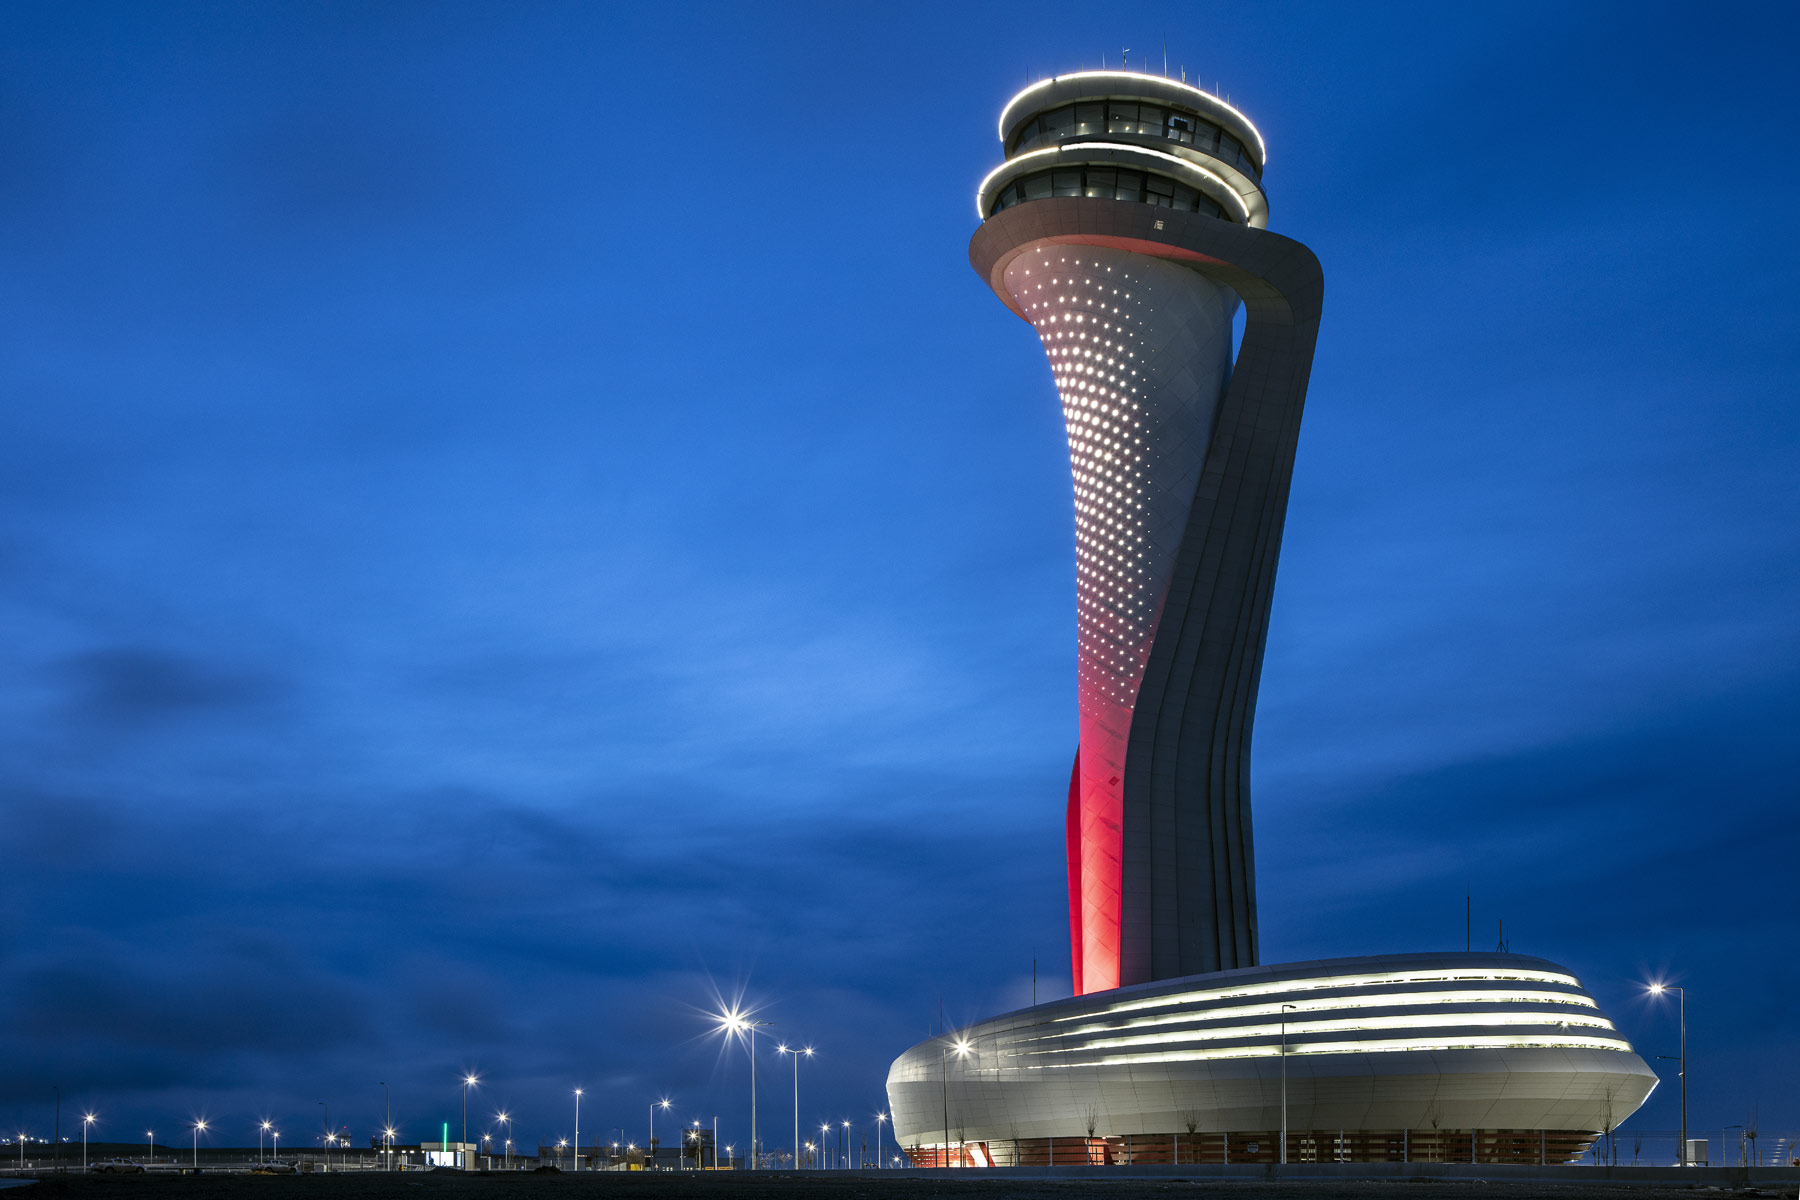 iGA Istanbul Airport Published Its Sustainability Report